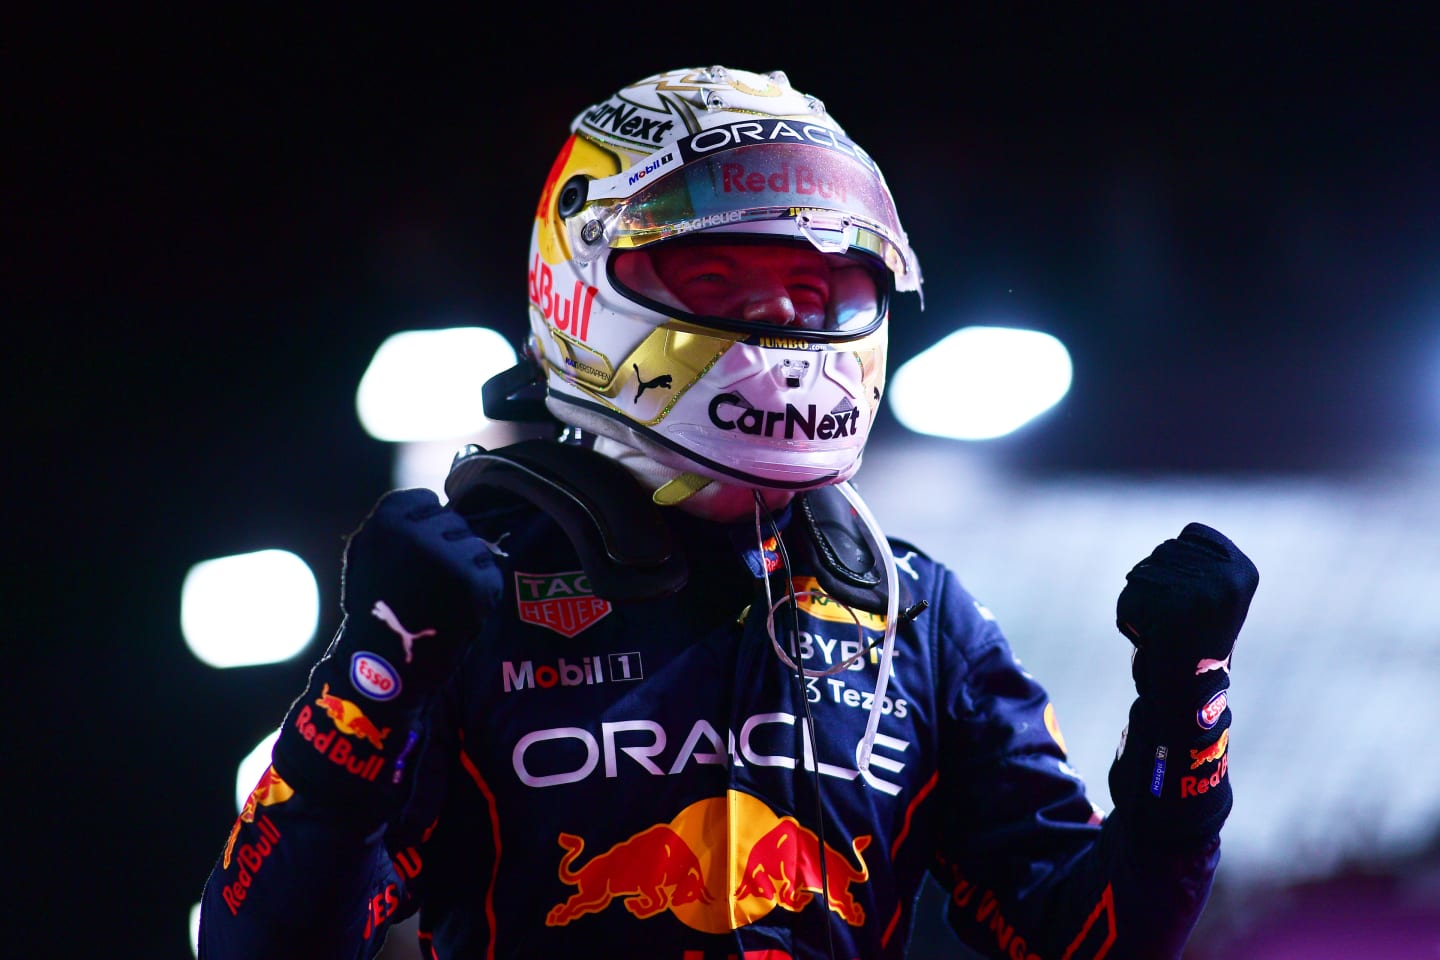 JEDDAH, SAUDI ARABIA - MARCH 27: Race winner Max Verstappen of the Netherlands and Oracle Red Bull Racing celebrates in parc ferme during the F1 Grand Prix of Saudi Arabia at the Jeddah Corniche Circuit on March 27, 2022 in Jeddah, Saudi Arabia. (Photo by Mario Renzi - Formula 1/Formula 1 via Getty Images)